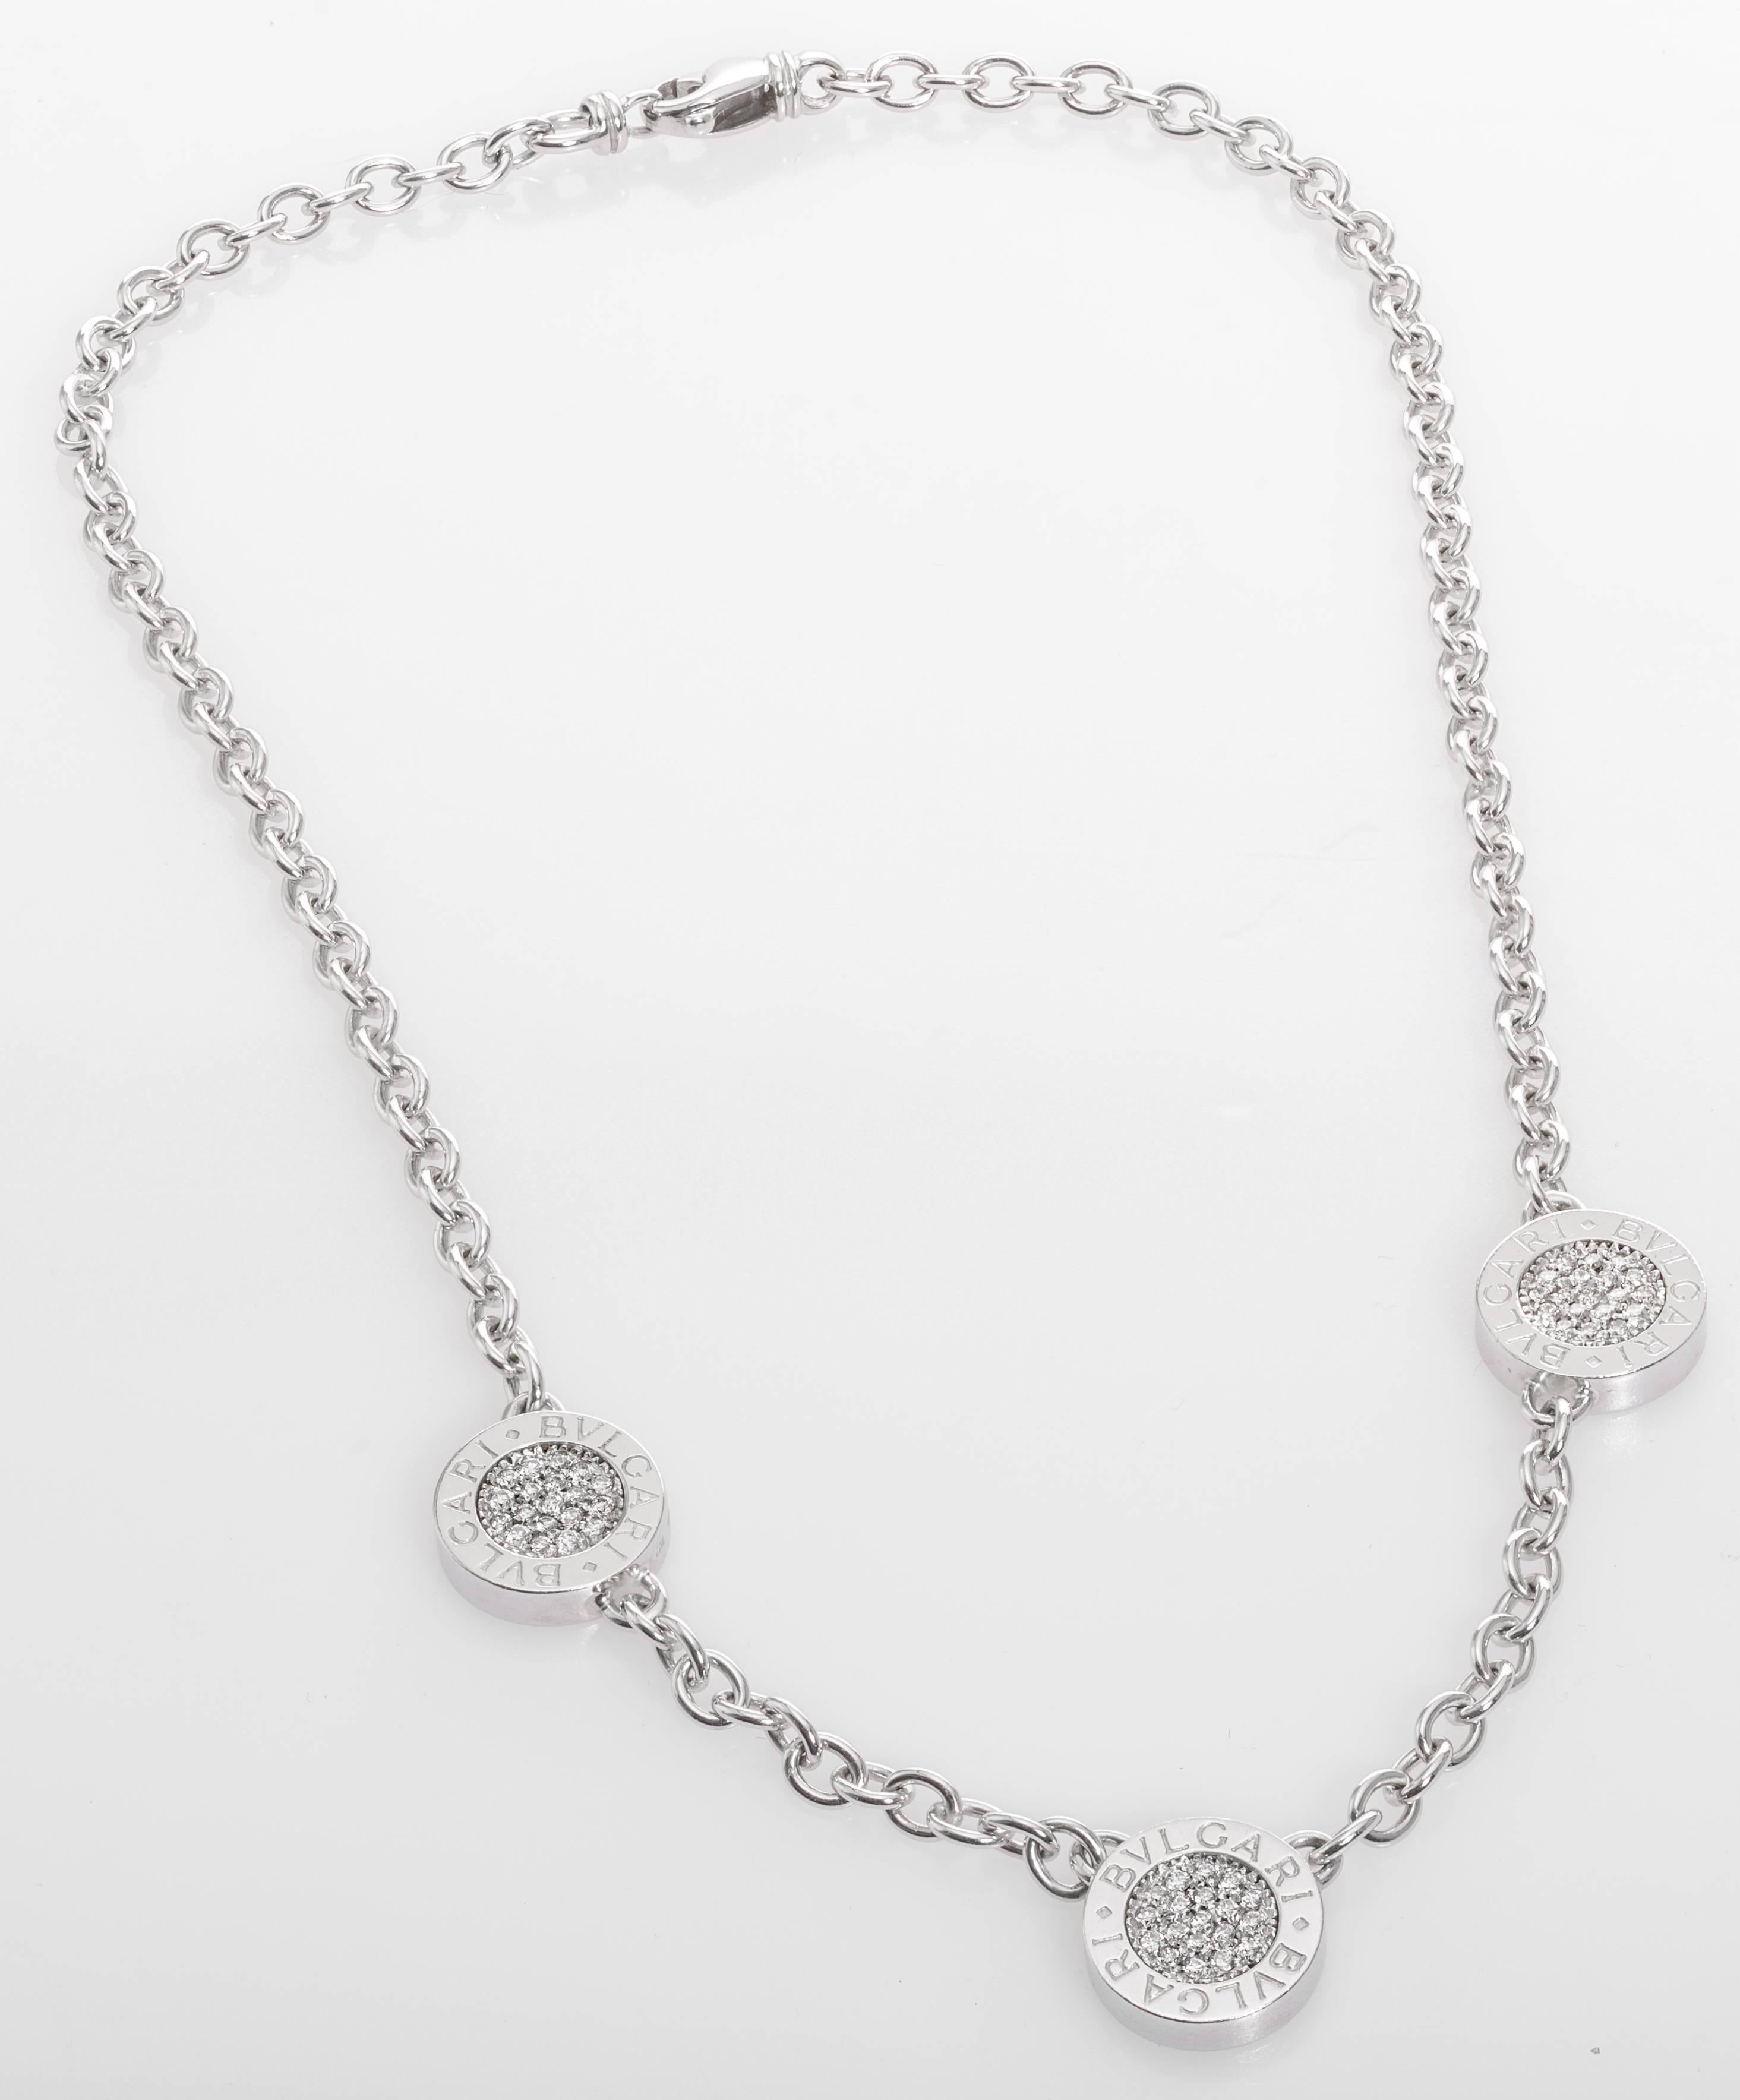 This Bulgari BVLGARI BVLGARI collection necklace has three charms with pavé-set round diamonds on one side and black onyx on the other. The necklace is 15.5" long and has a lobster clasp. 